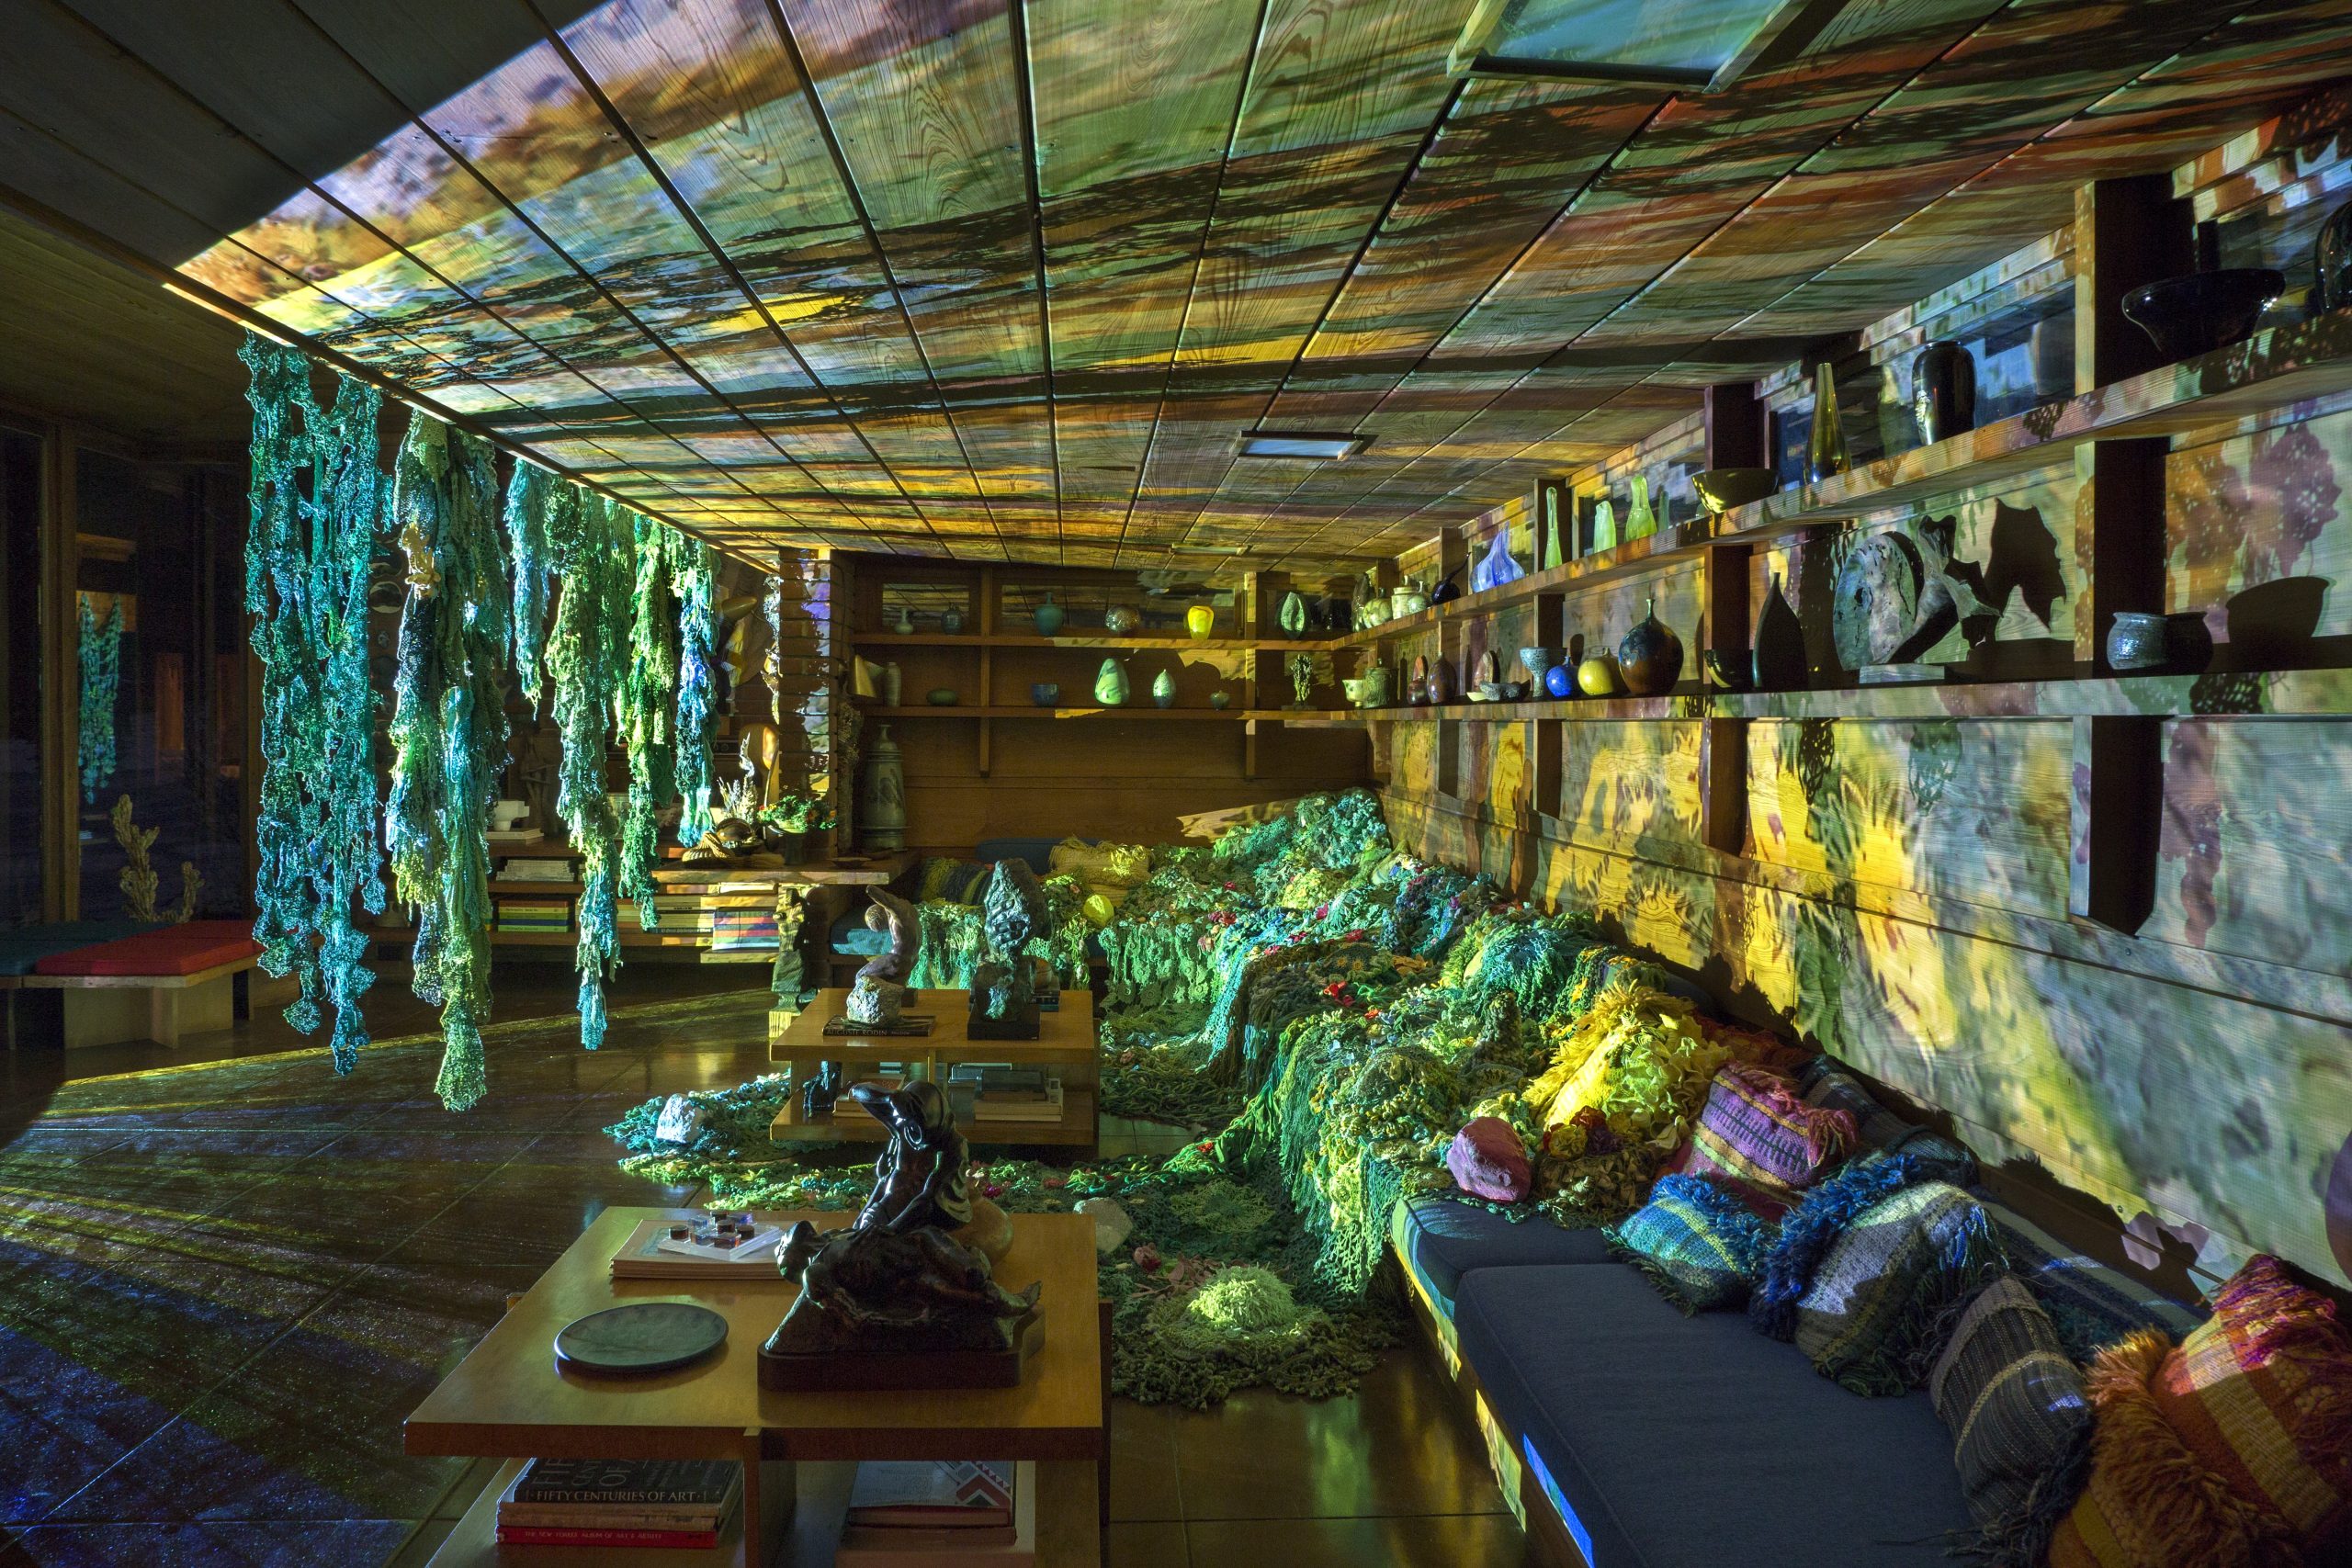 Image: Nighttime installation view of local authorities in the spirit world shape shift through time (we call it evolution) by Melissa Webb. Interior shot of Frank Loyd Wright designed home shows a sitting area bathed in psychadelic light. The many colored lights come from an artist's projection out of frame and cast green and yellow shadows upon the wooden walls. Textile pieces, made from crocheted fabric hang from the ceiling and the couch. Photo by P.D. Rearick.